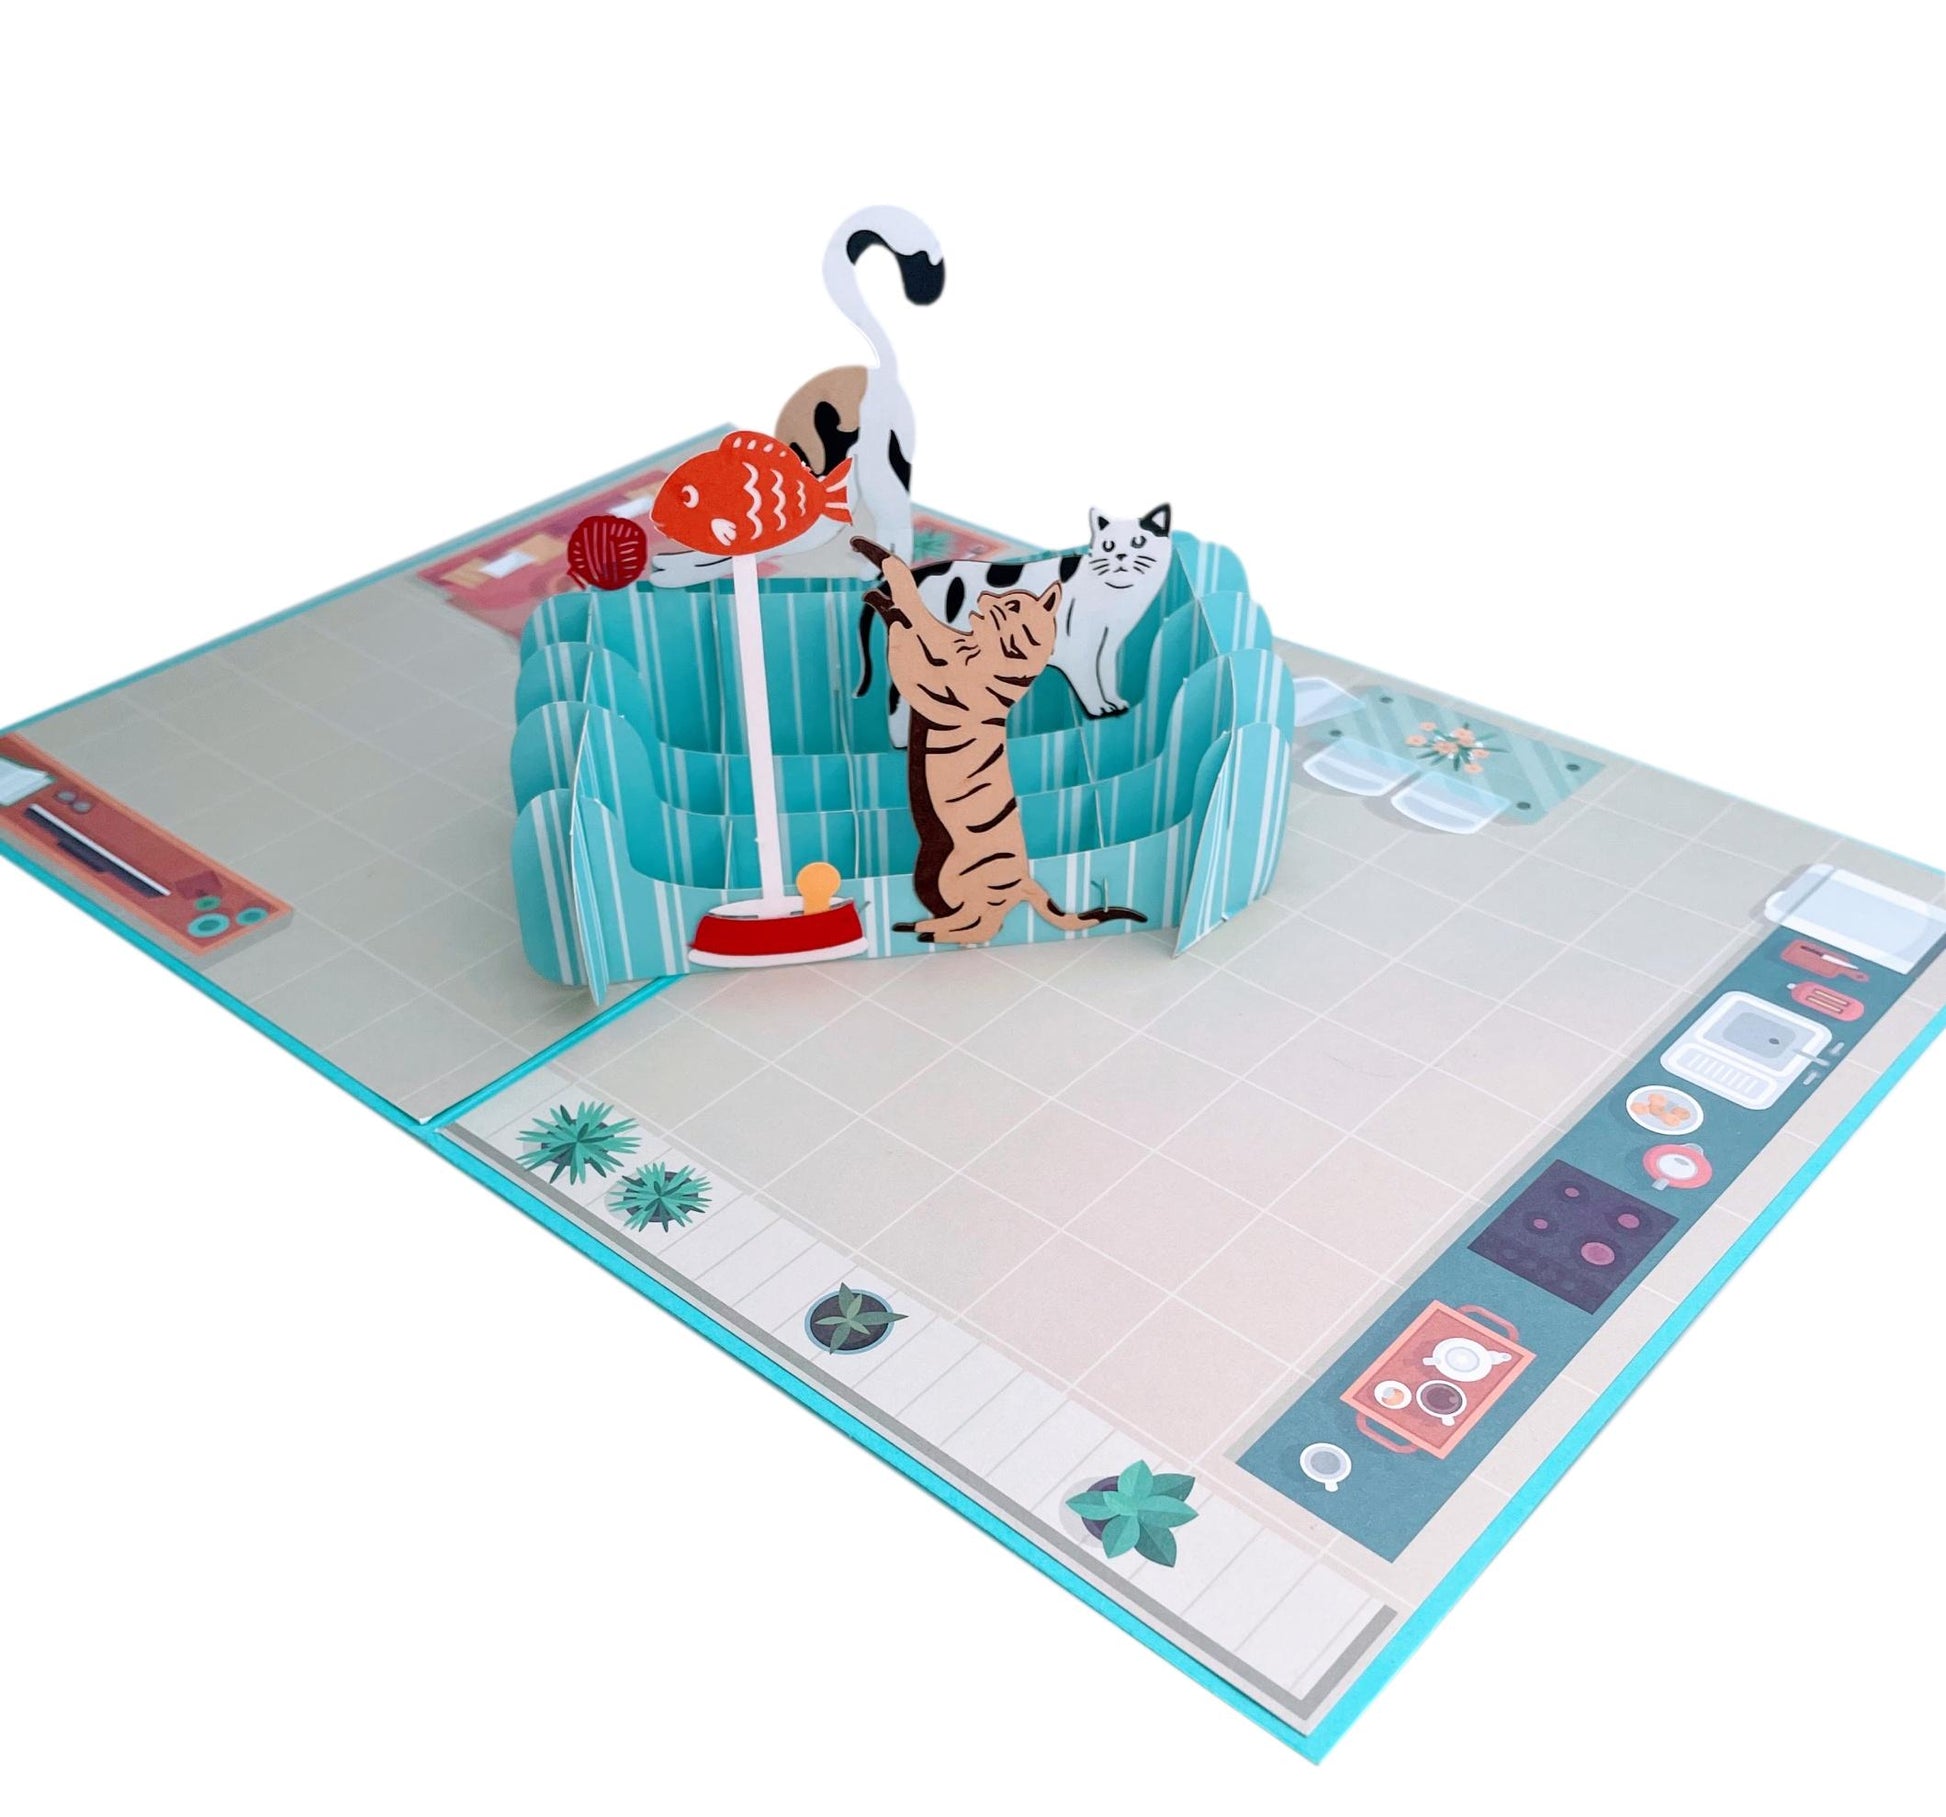 Playful Cats 3D Pop Up Greeting Card - Animal - best cat christmas cards - Birthday - birthday card - iGifts And Cards